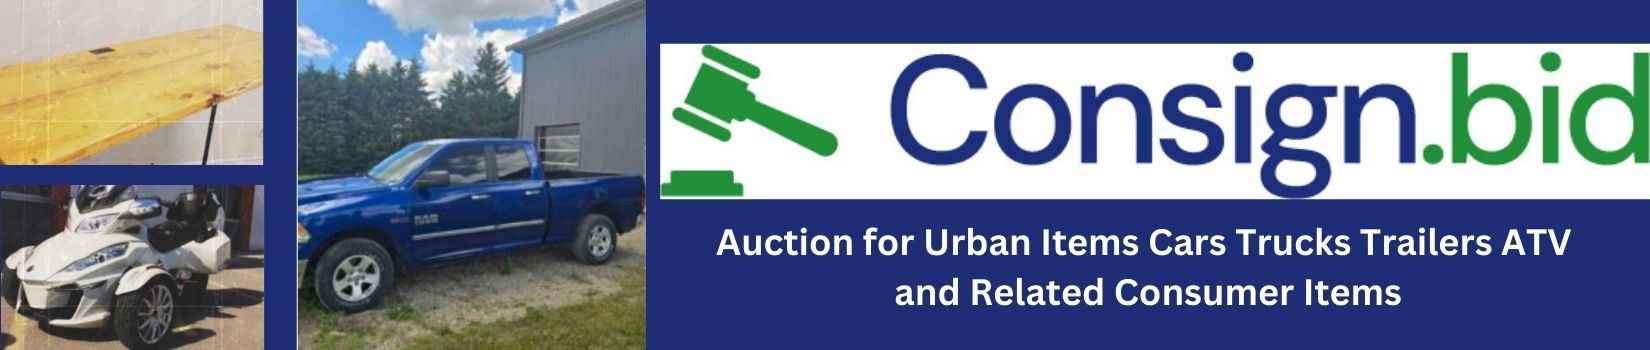 ConsignBid Online Auction Consumer Items August 28th 6 PM